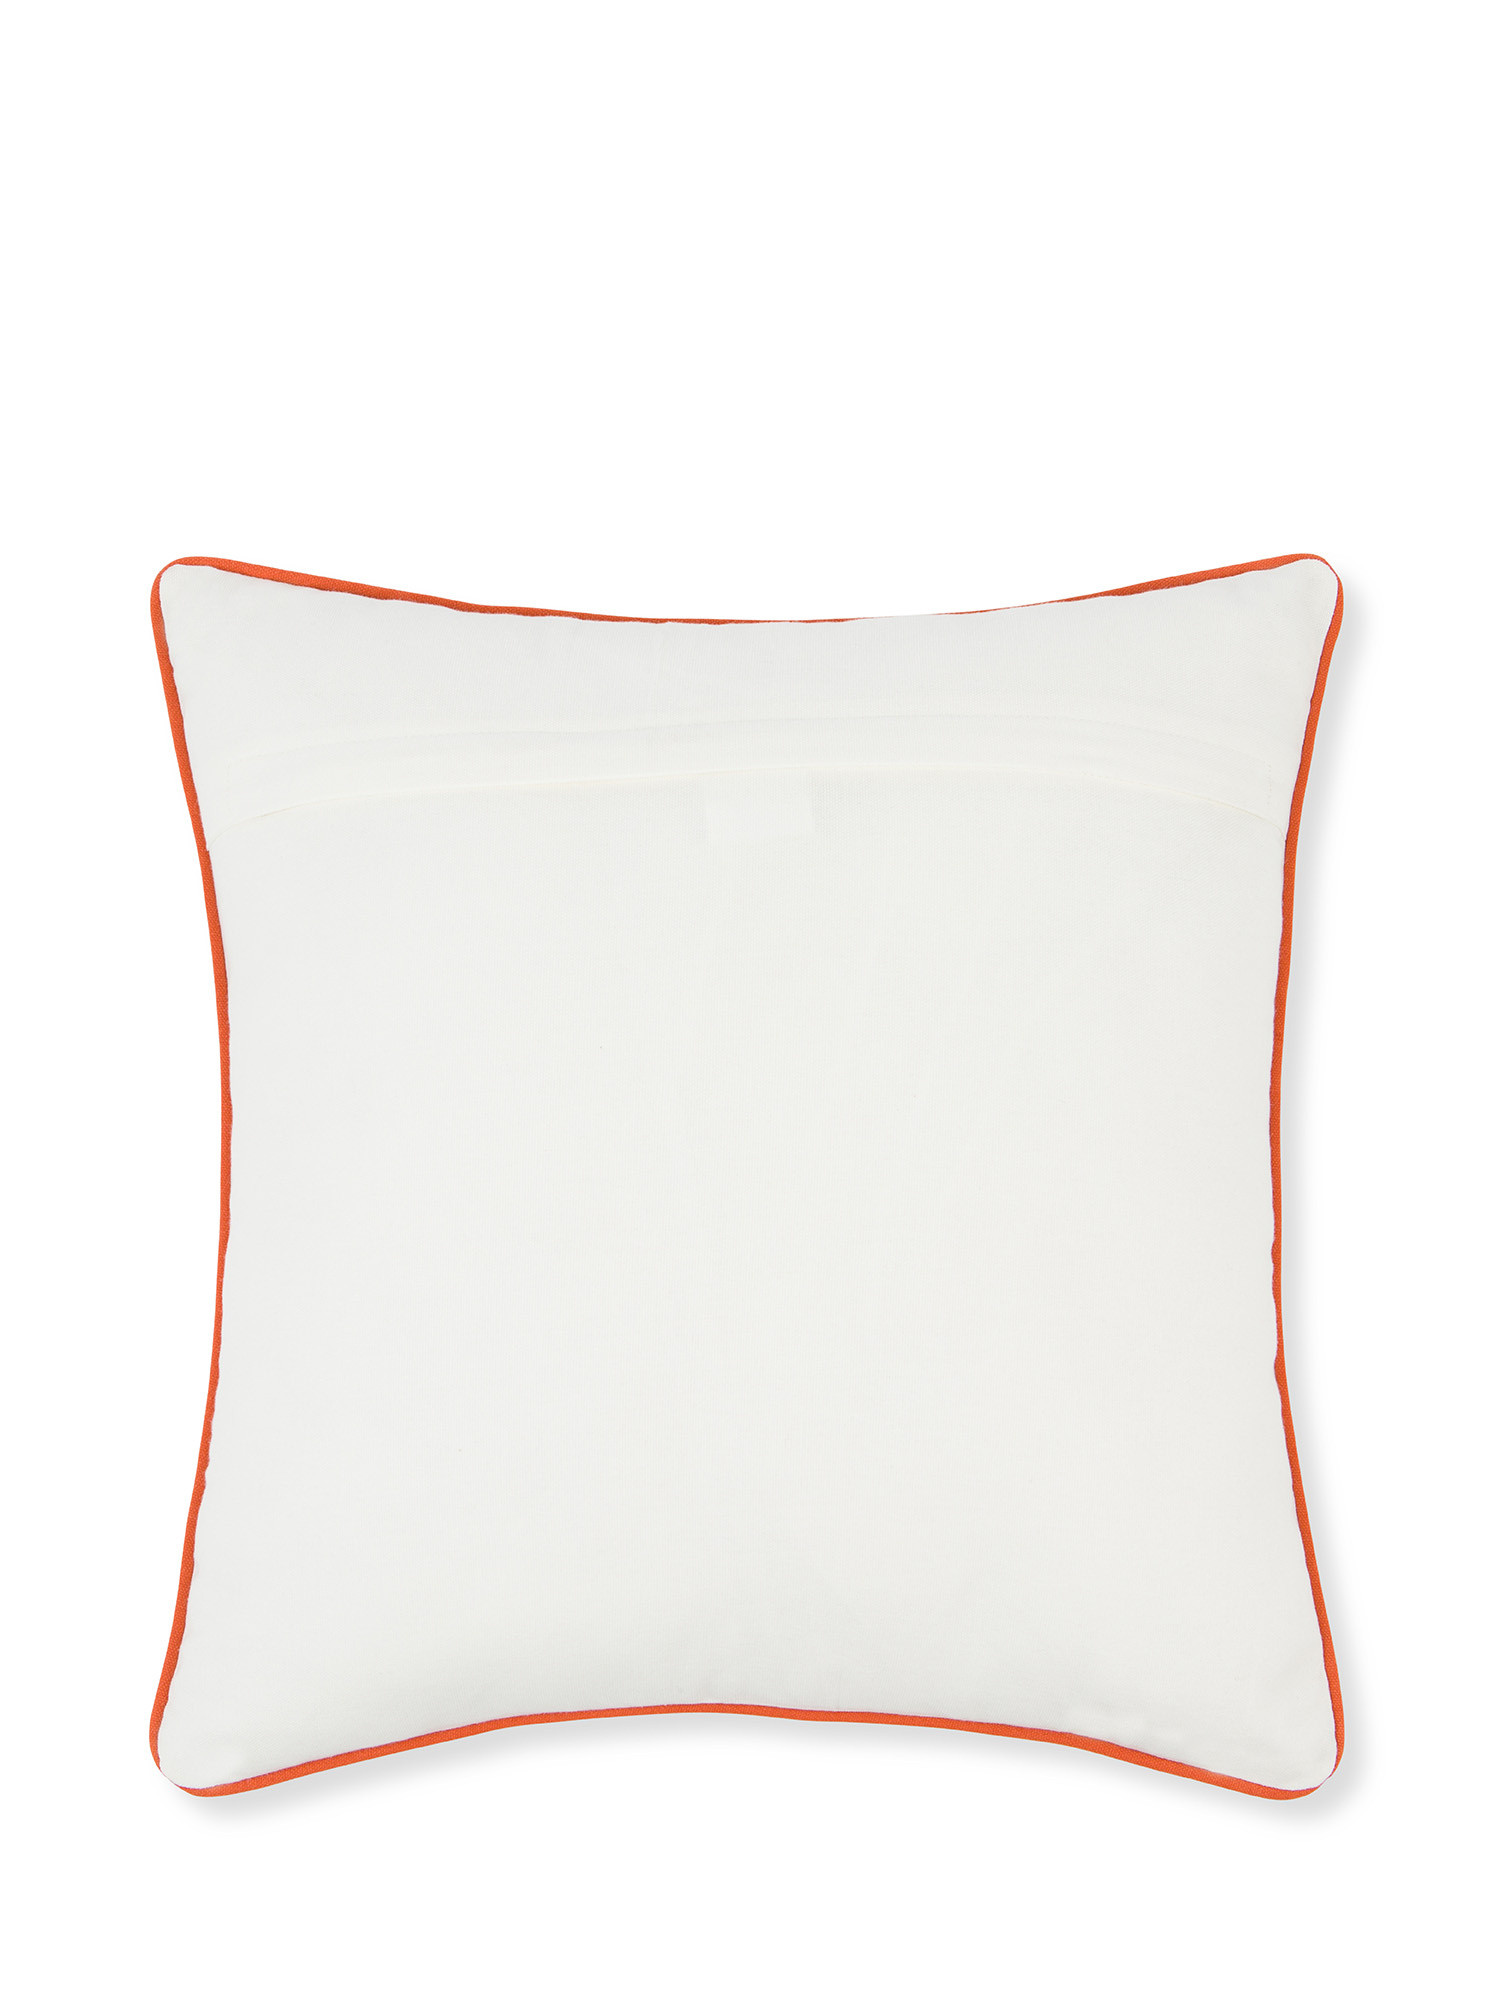 Embroidered cushion with damask pattern 45x45cm, White, large image number 1